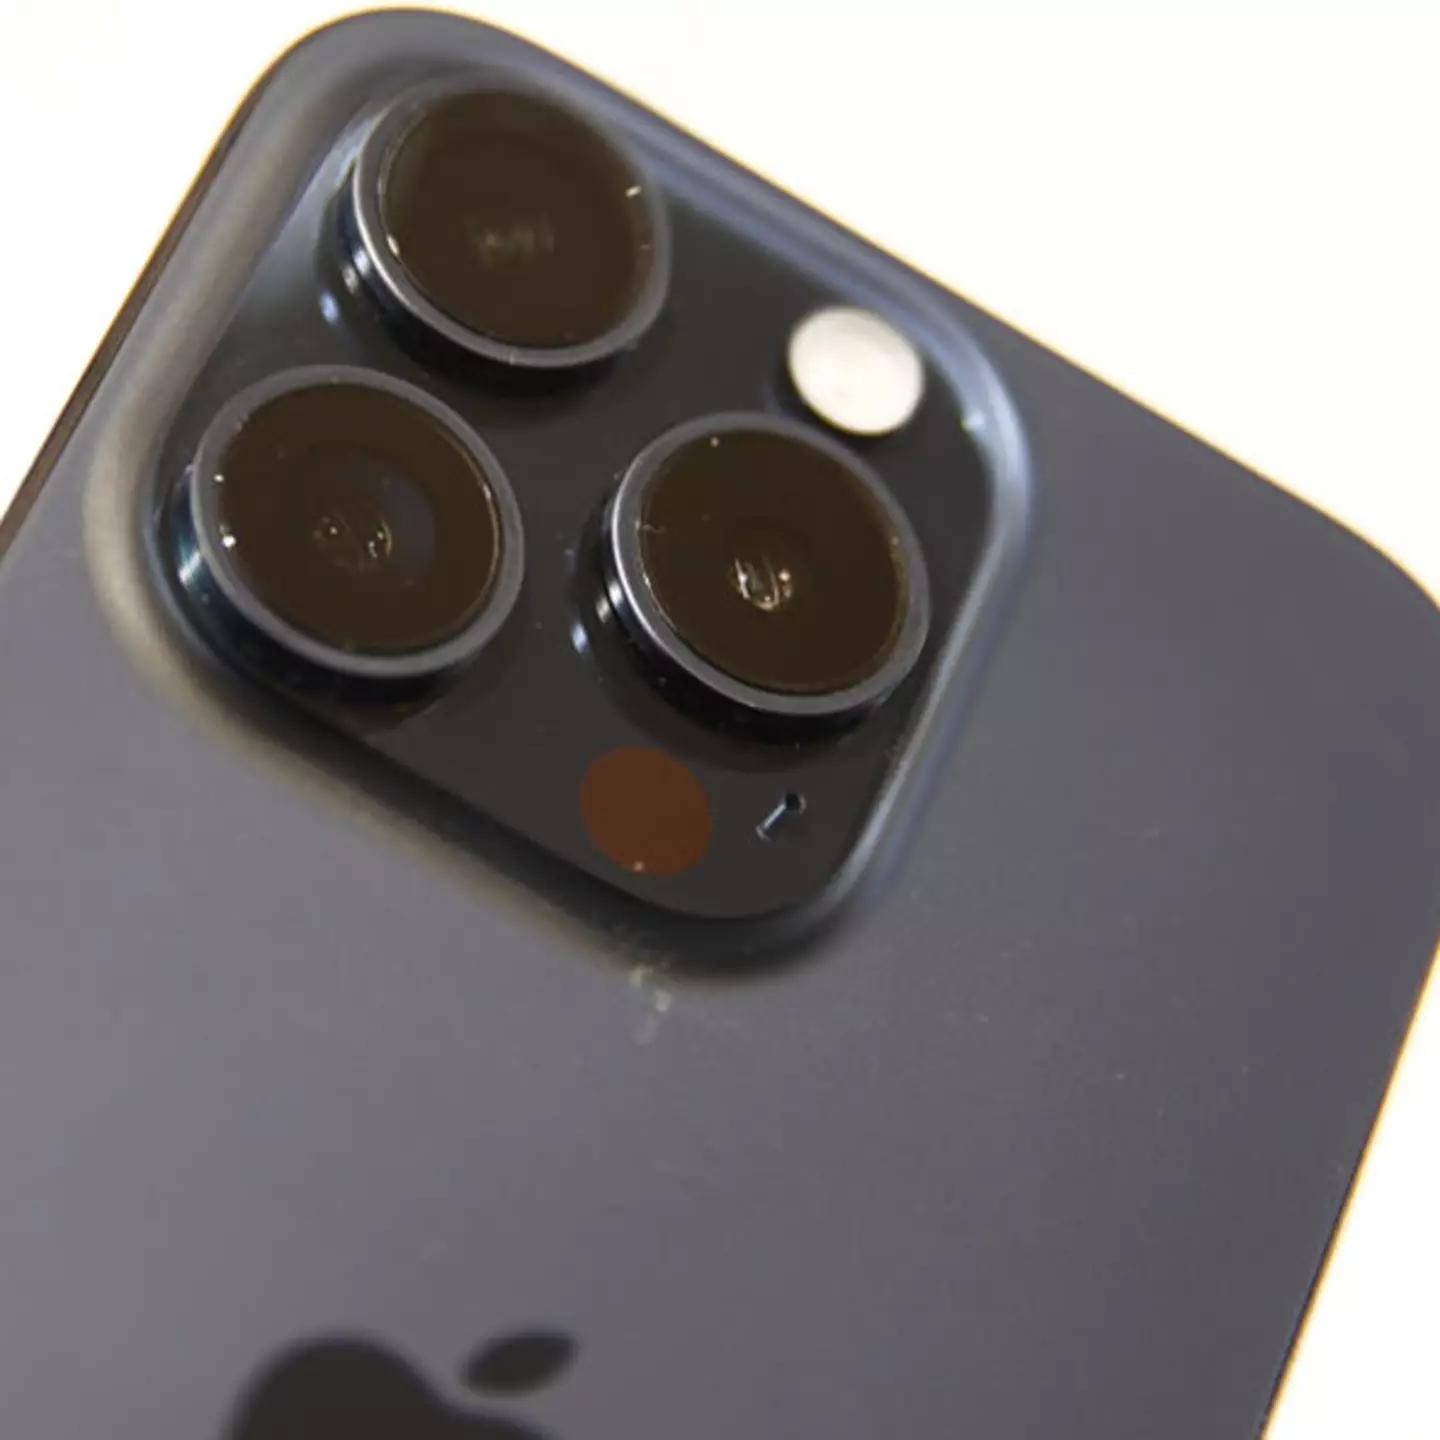 iPhone 17 could feature a massive selfie camera upgrade